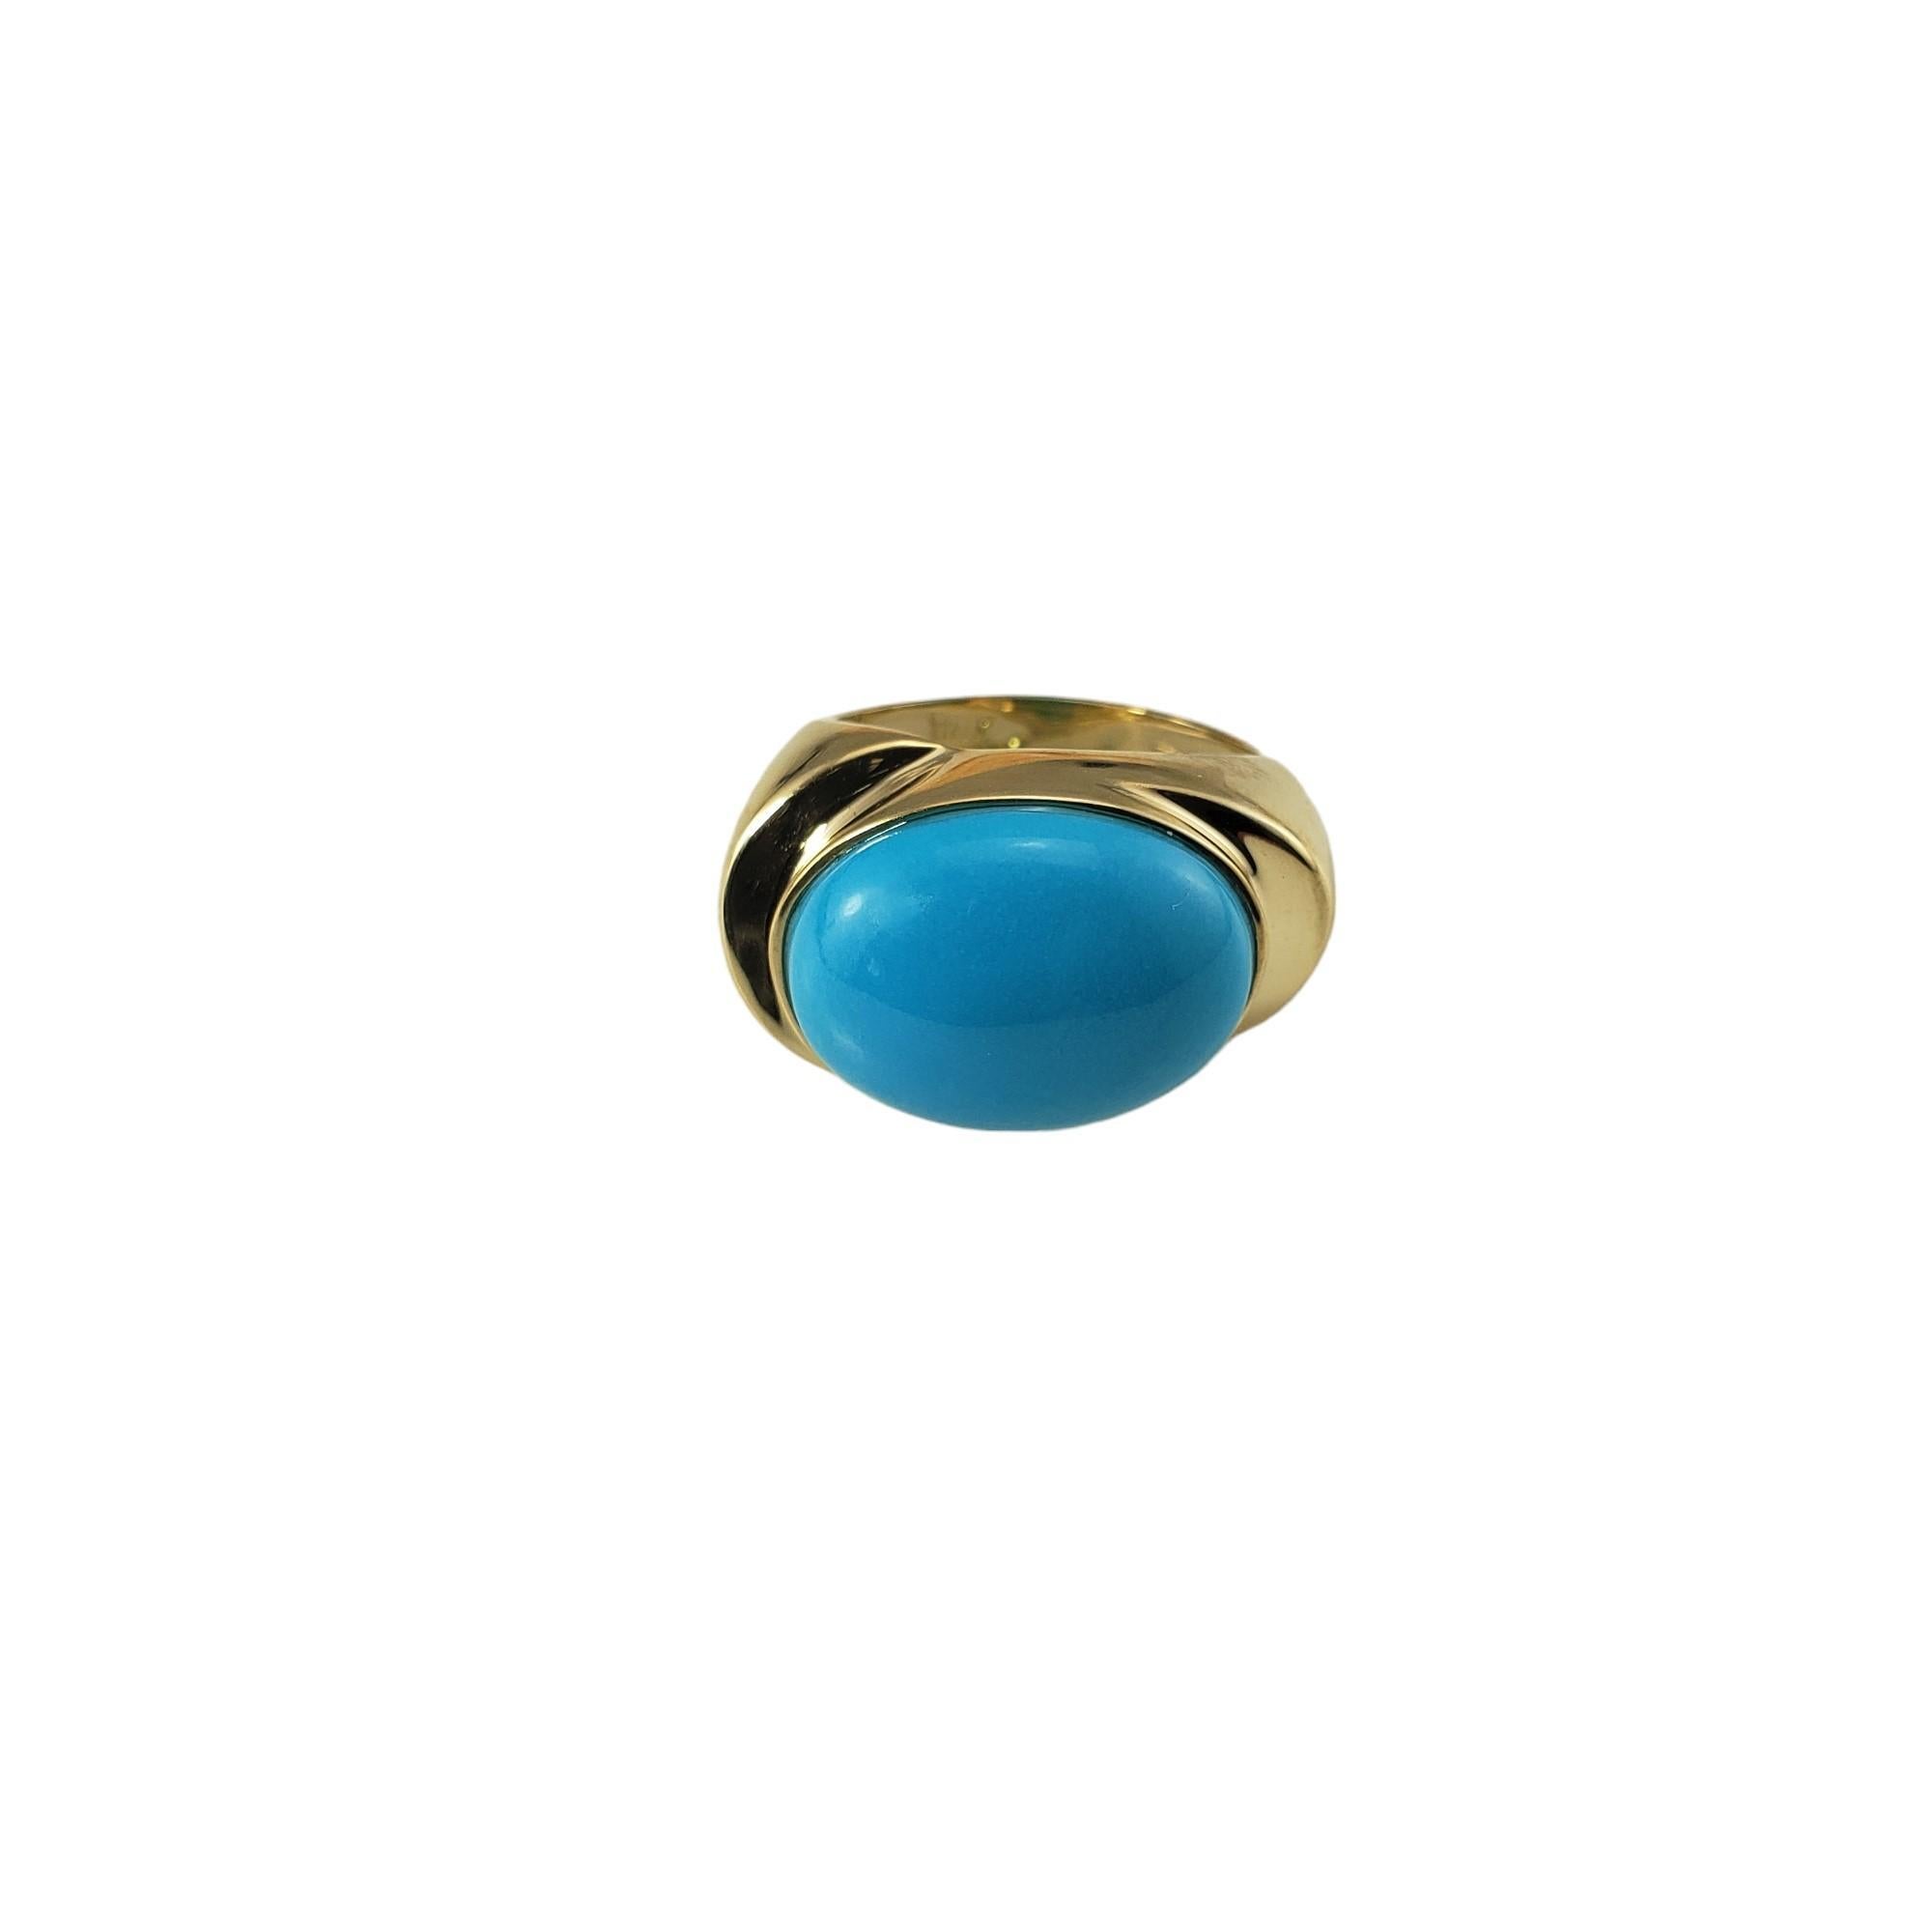 14 Karat Yellow Gold and Turquoise Ring Size 5

This stunning ring features one oval cabochon turquoise stone (17 mm x 13 mm) set in beautifully detailed 14K yellow gold.  

Width: 14 mm.  

Shank: 4 mm.

Ring Size: 5

Stamped: 14K Italy C

Weight: